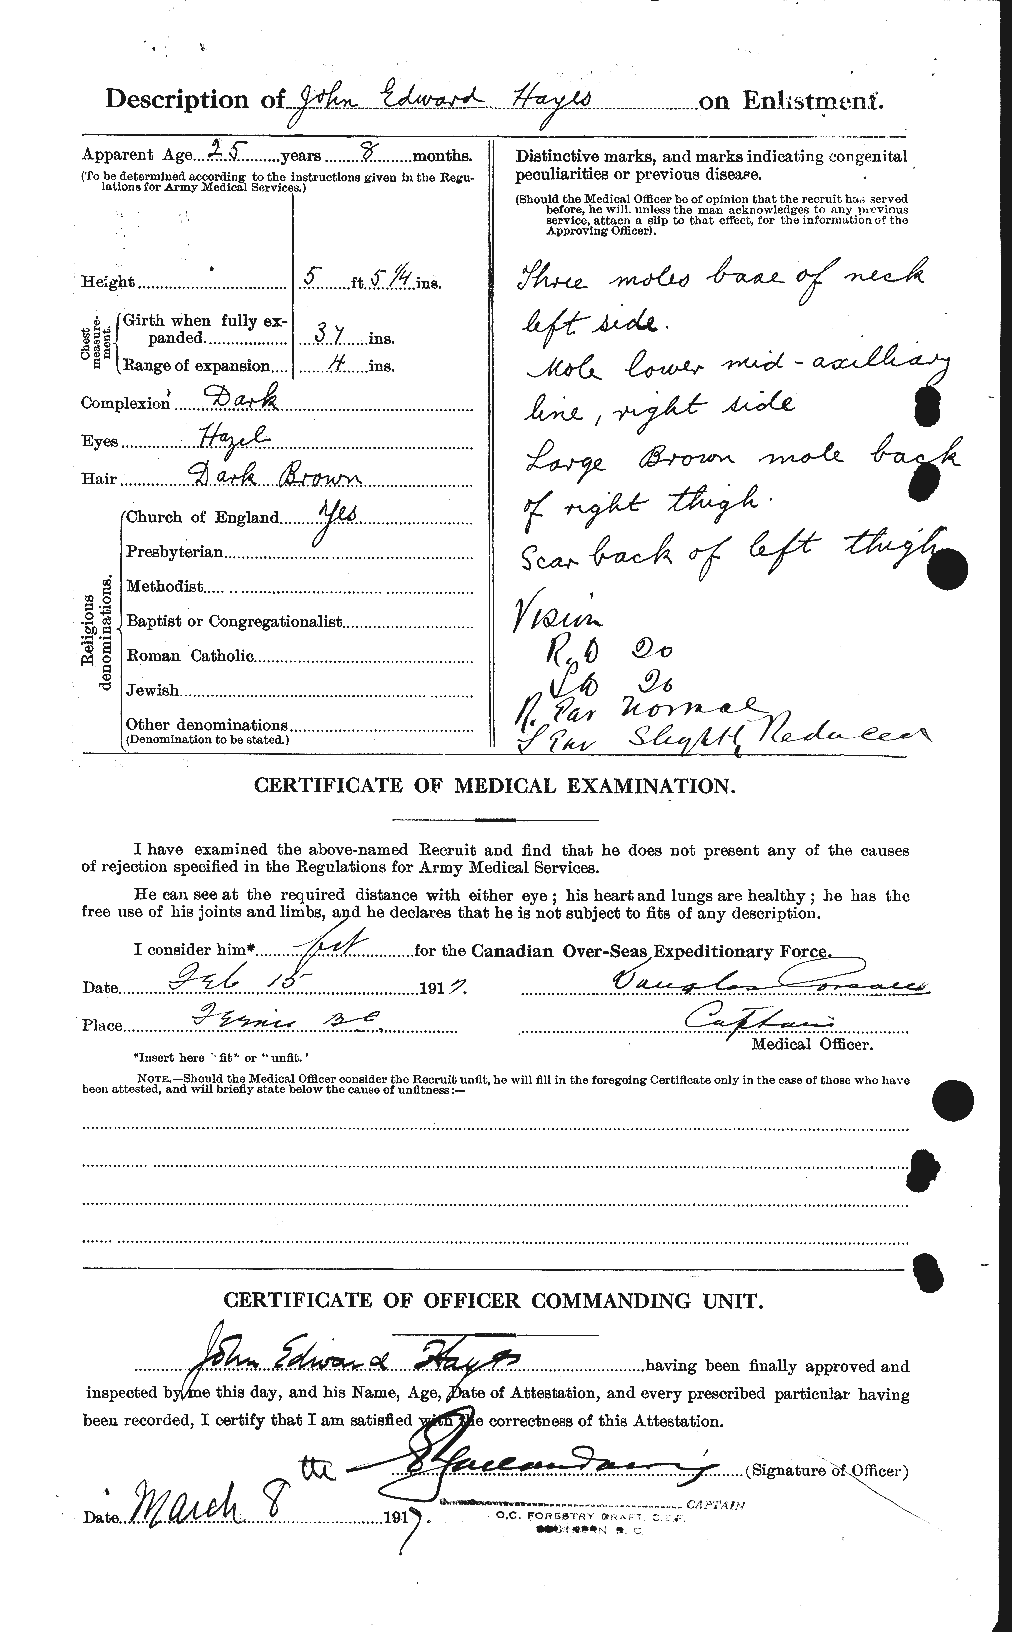 Personnel Records of the First World War - CEF 385572b